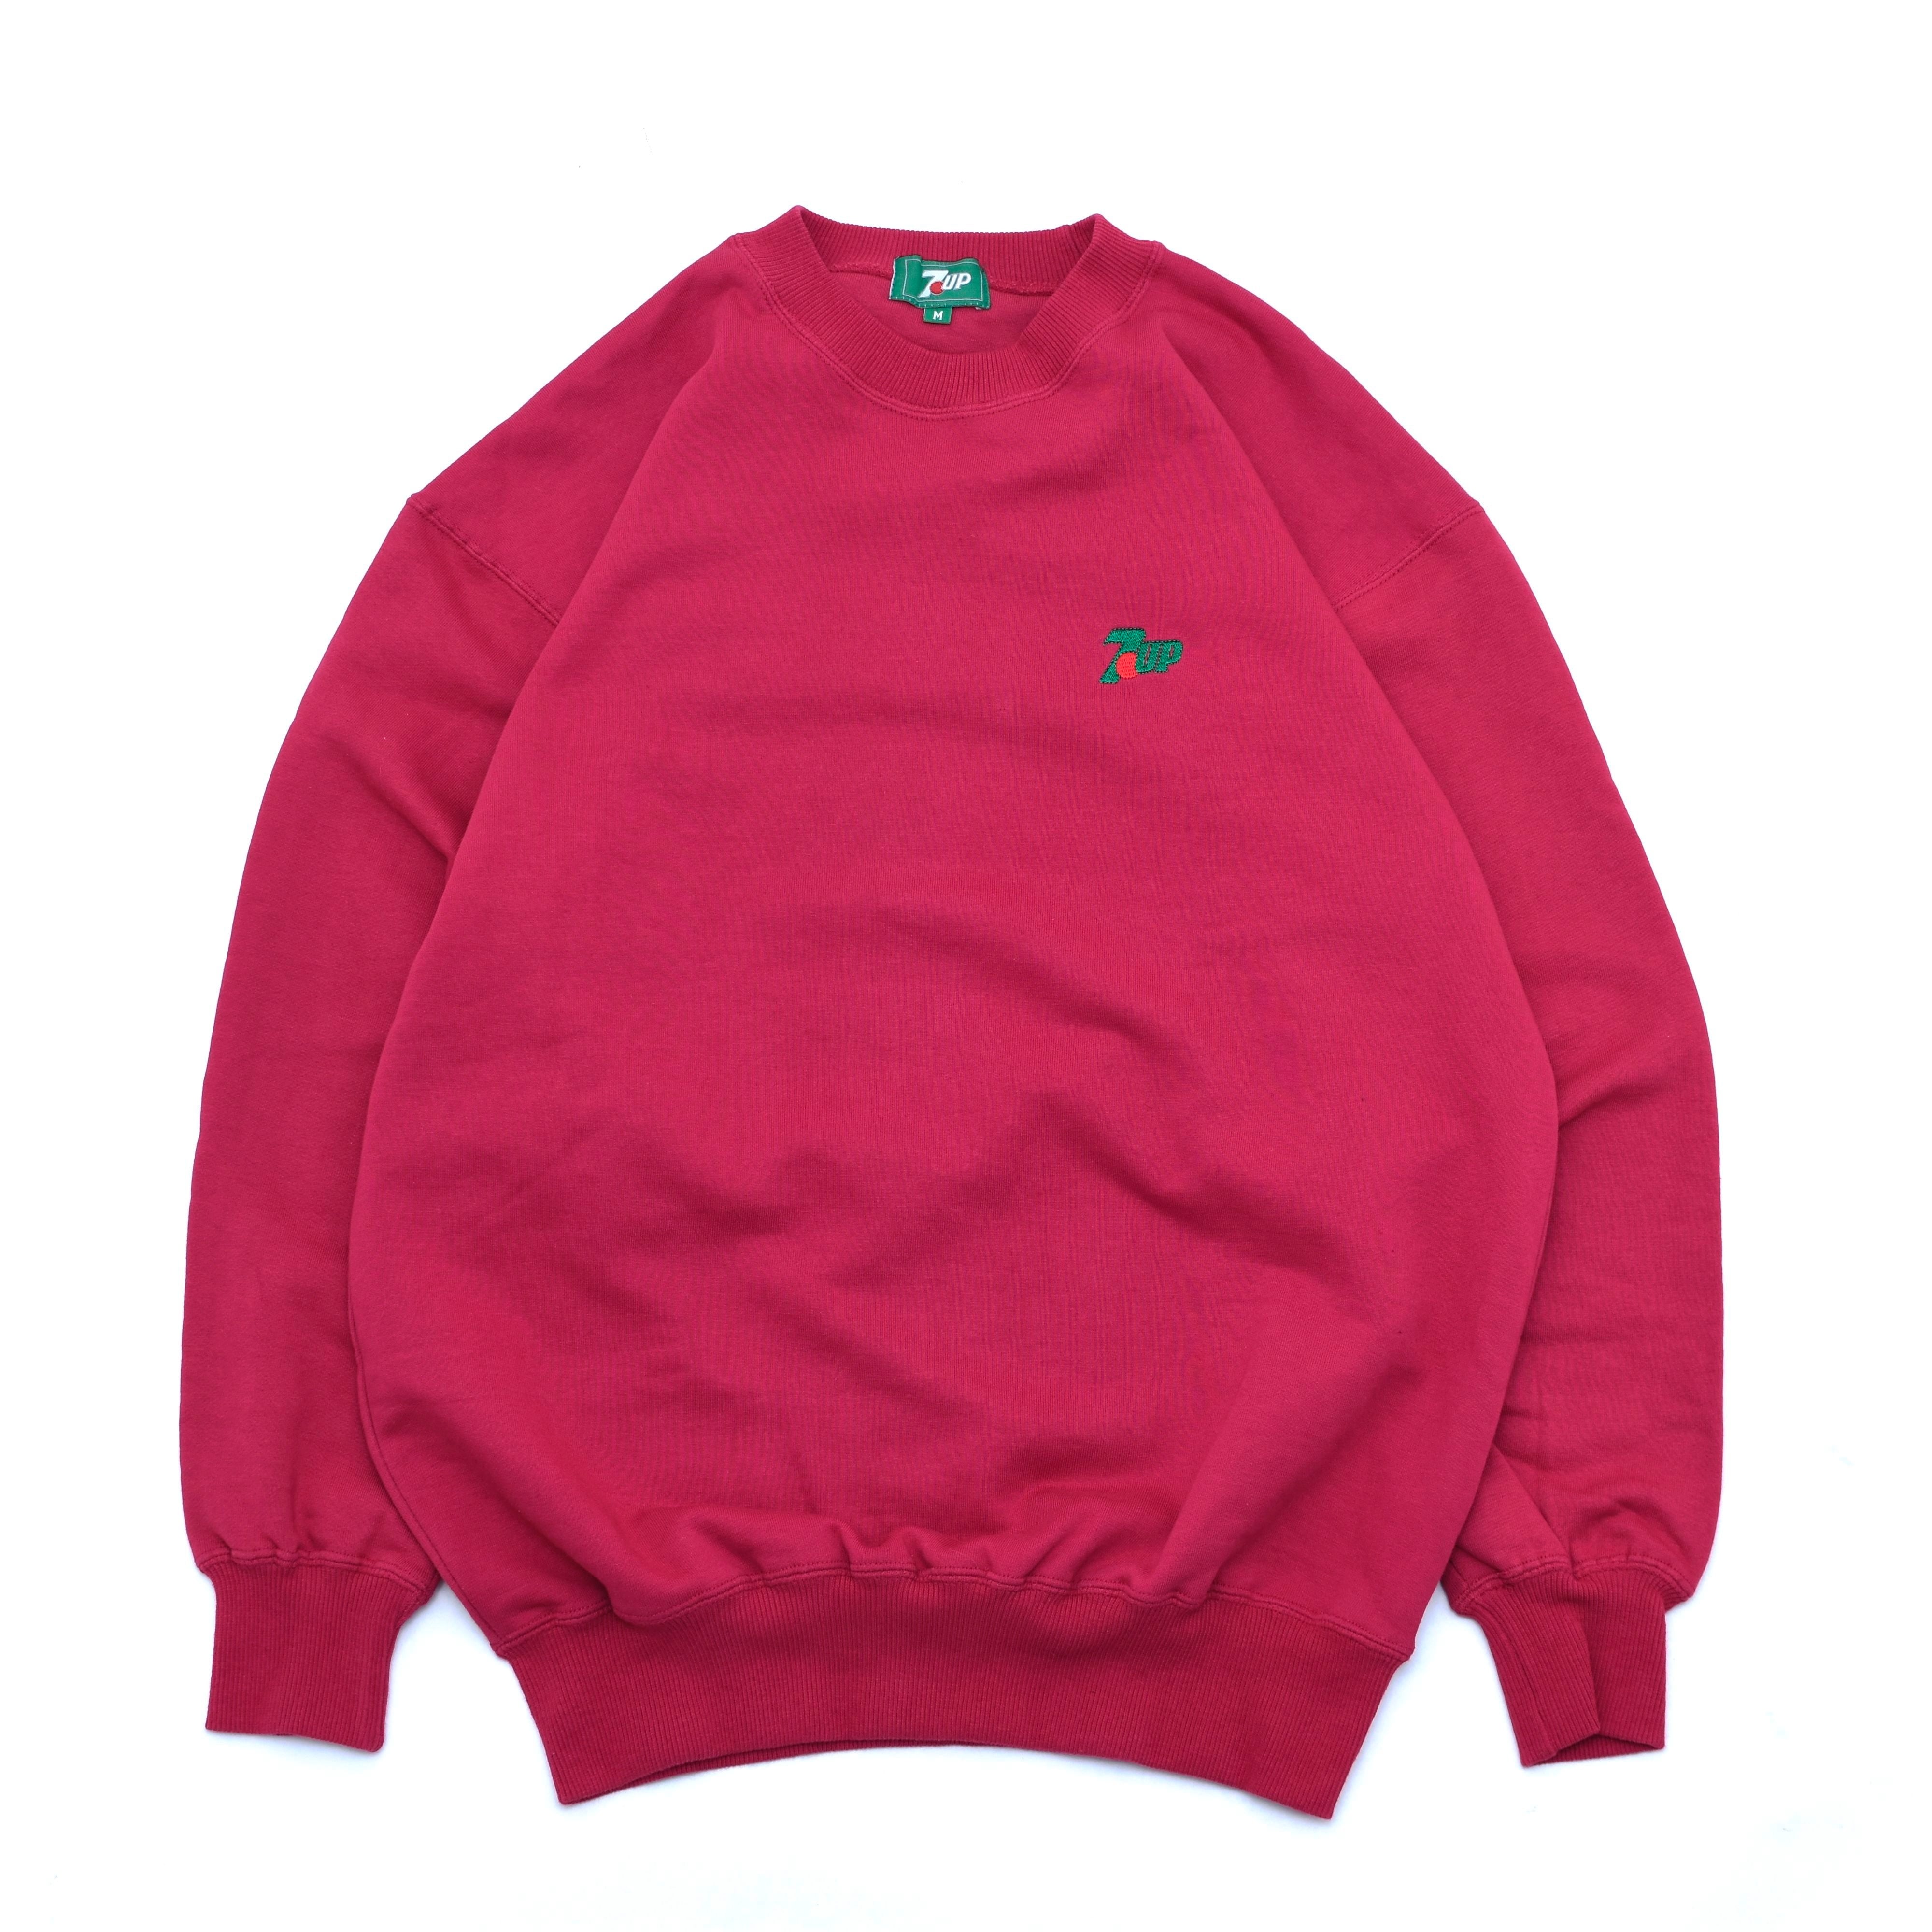 7UP one point logo embroidery sweatshirt